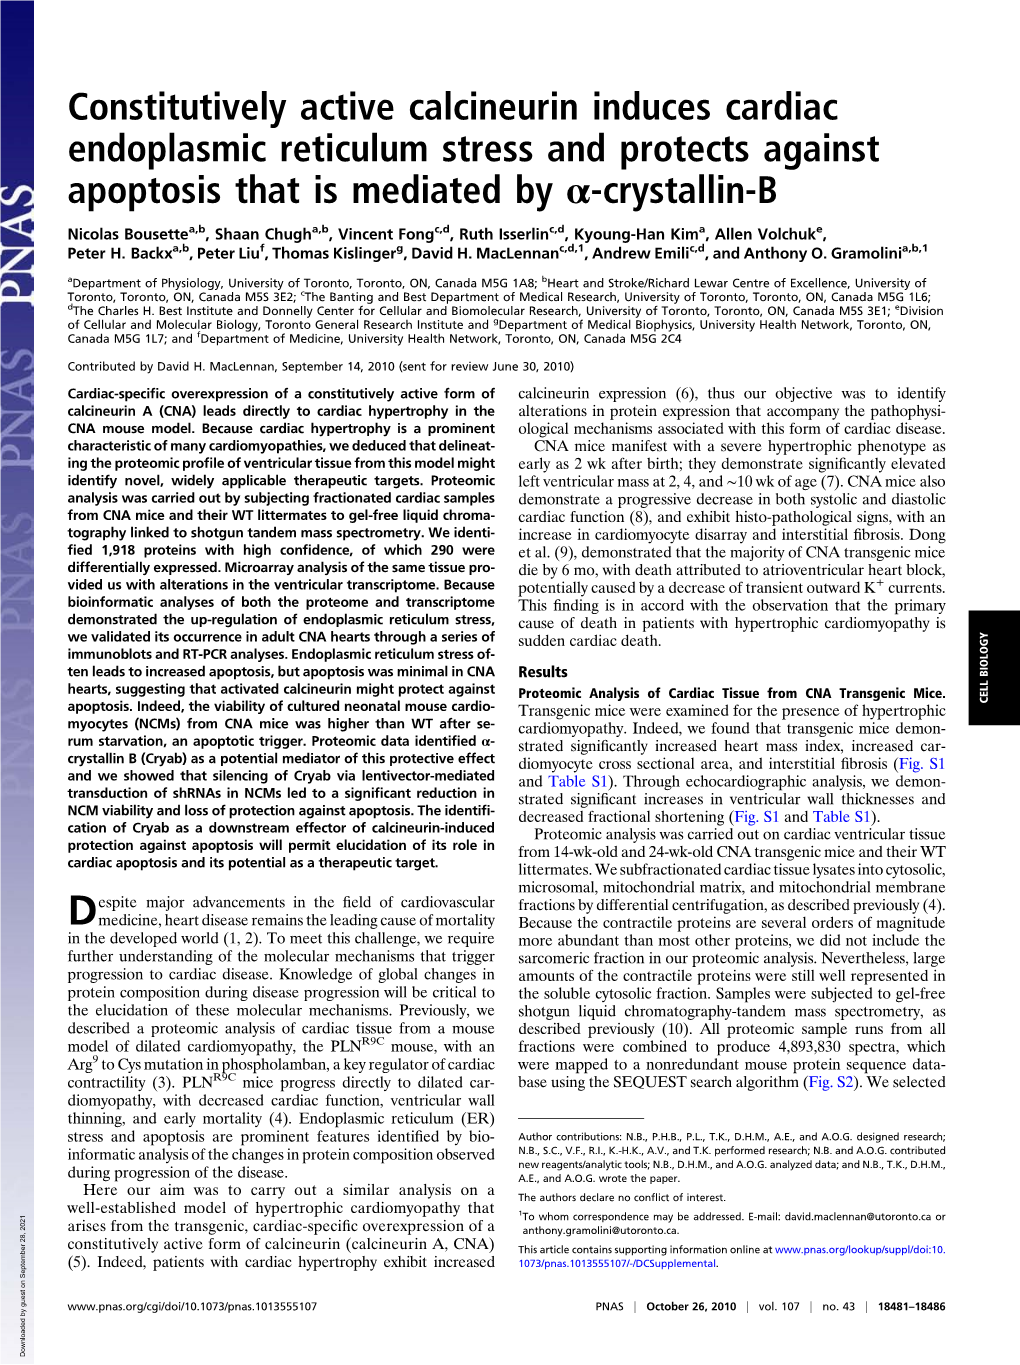 Constitutively Active Calcineurin Induces Cardiac Endoplasmic Reticulum Stress and Protects Against Apoptosis That Is Mediated by Α-Crystallin-B